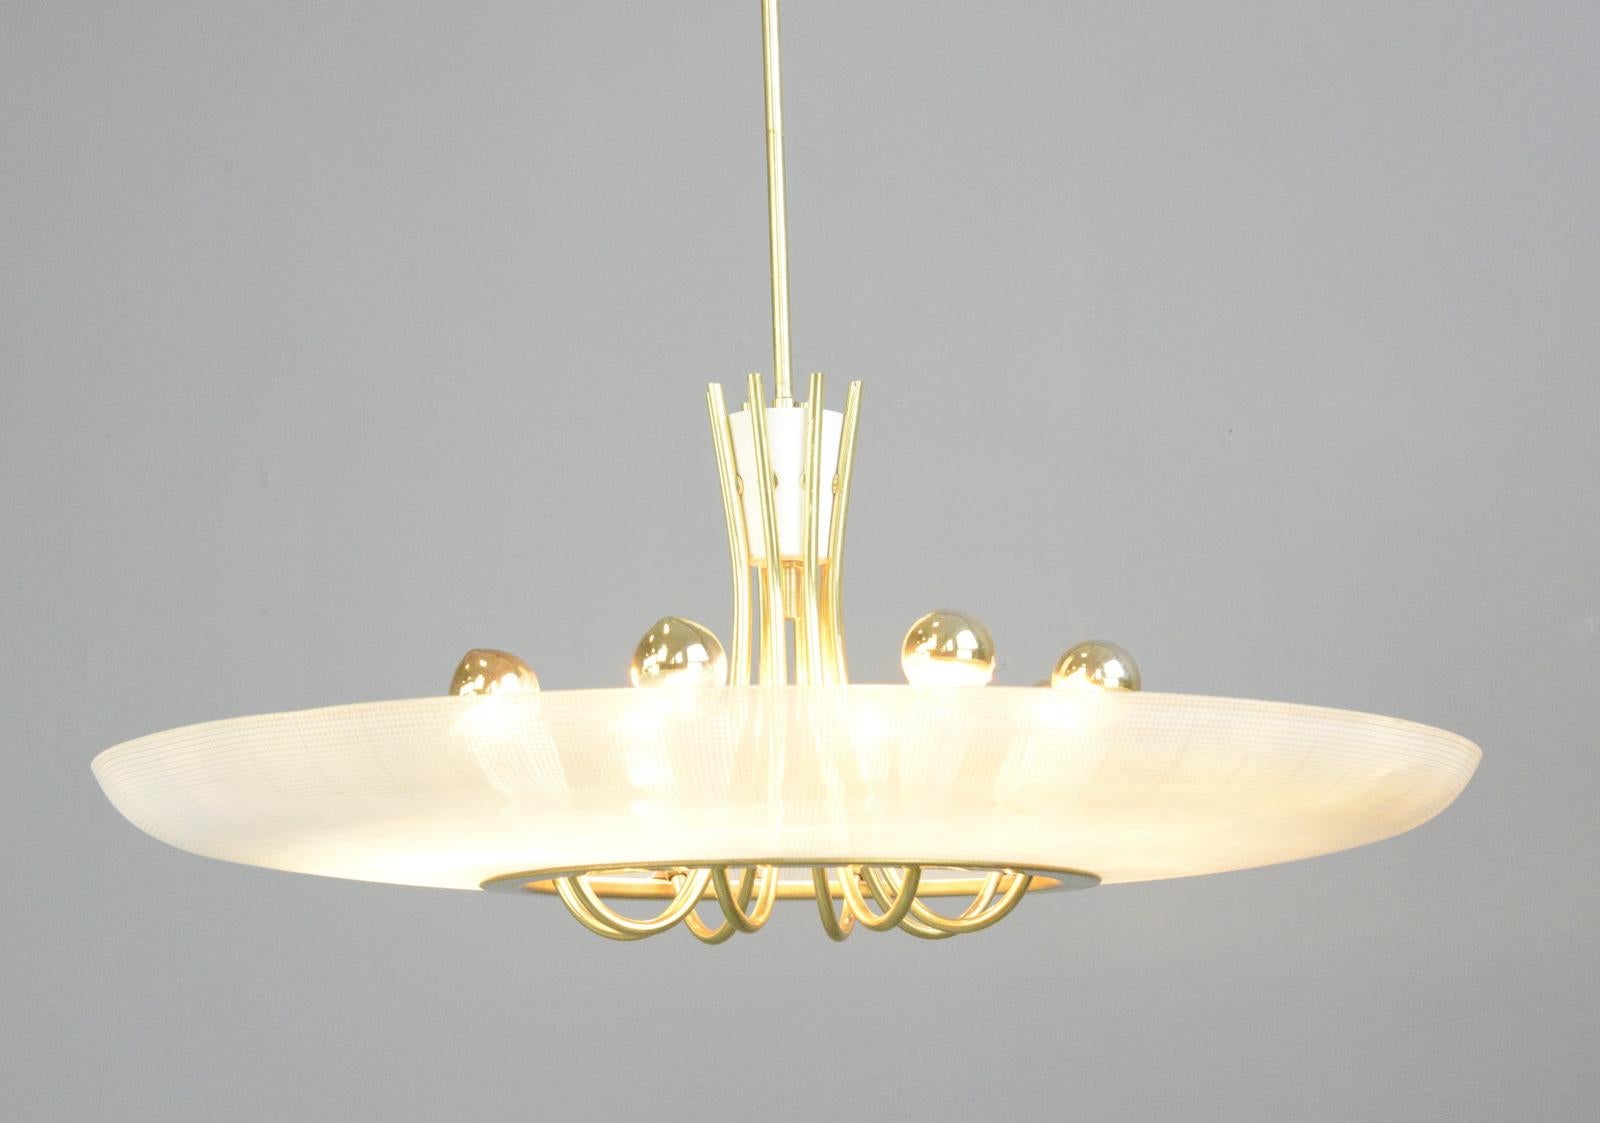 Large midcentury brass and glass chandelier, circa 1960s

- Patterned glass shade
- Brass arms and stem
- Takes 8x E14 fitting bulbs
- German, 1960s
- Measures: 70cm wide x 90cm tall inc ceiling rose

Condition report

Fully re wired with